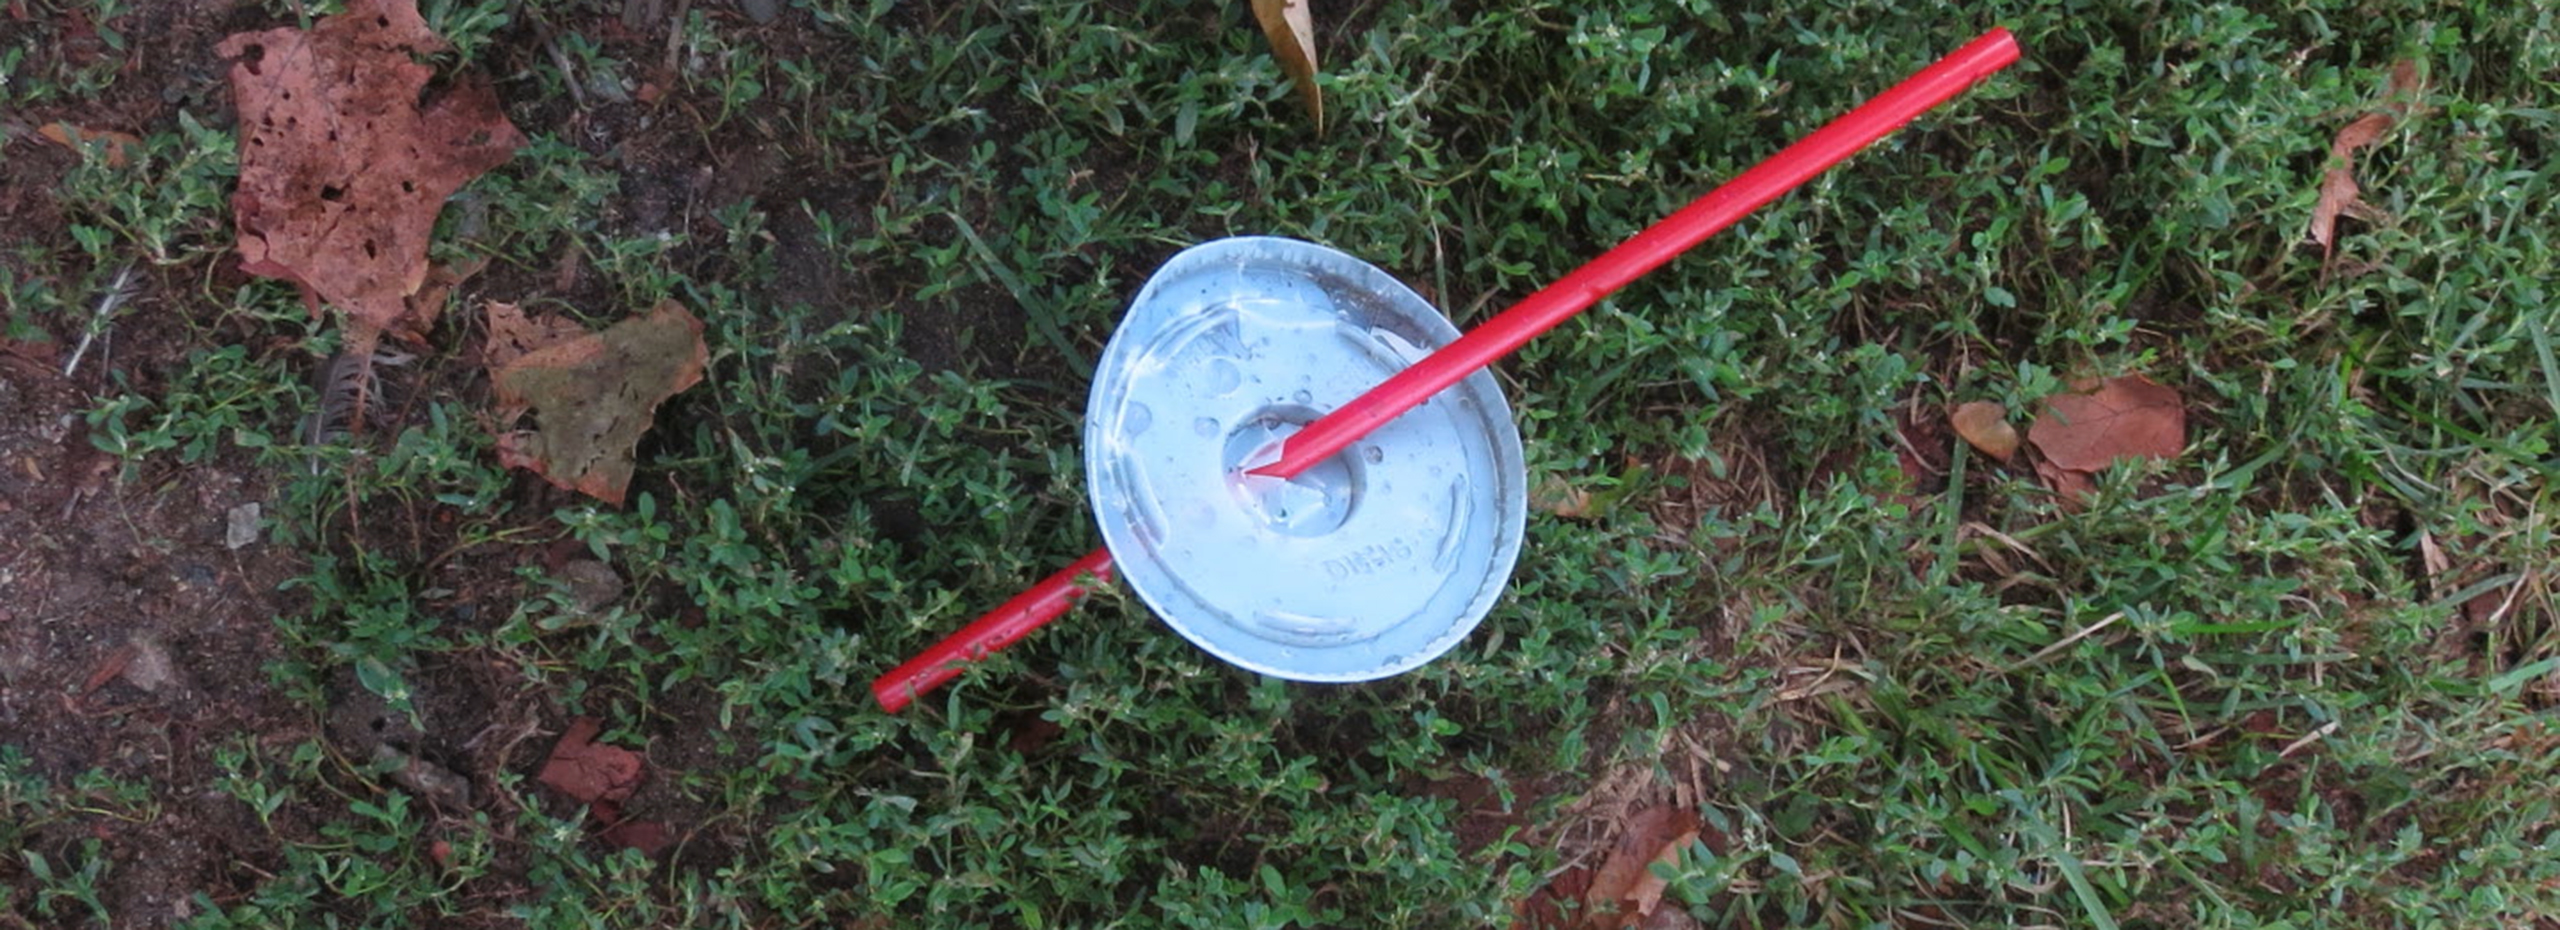 A white plastic cup lid pierced by a red plastic straw lies discarded on the green grass